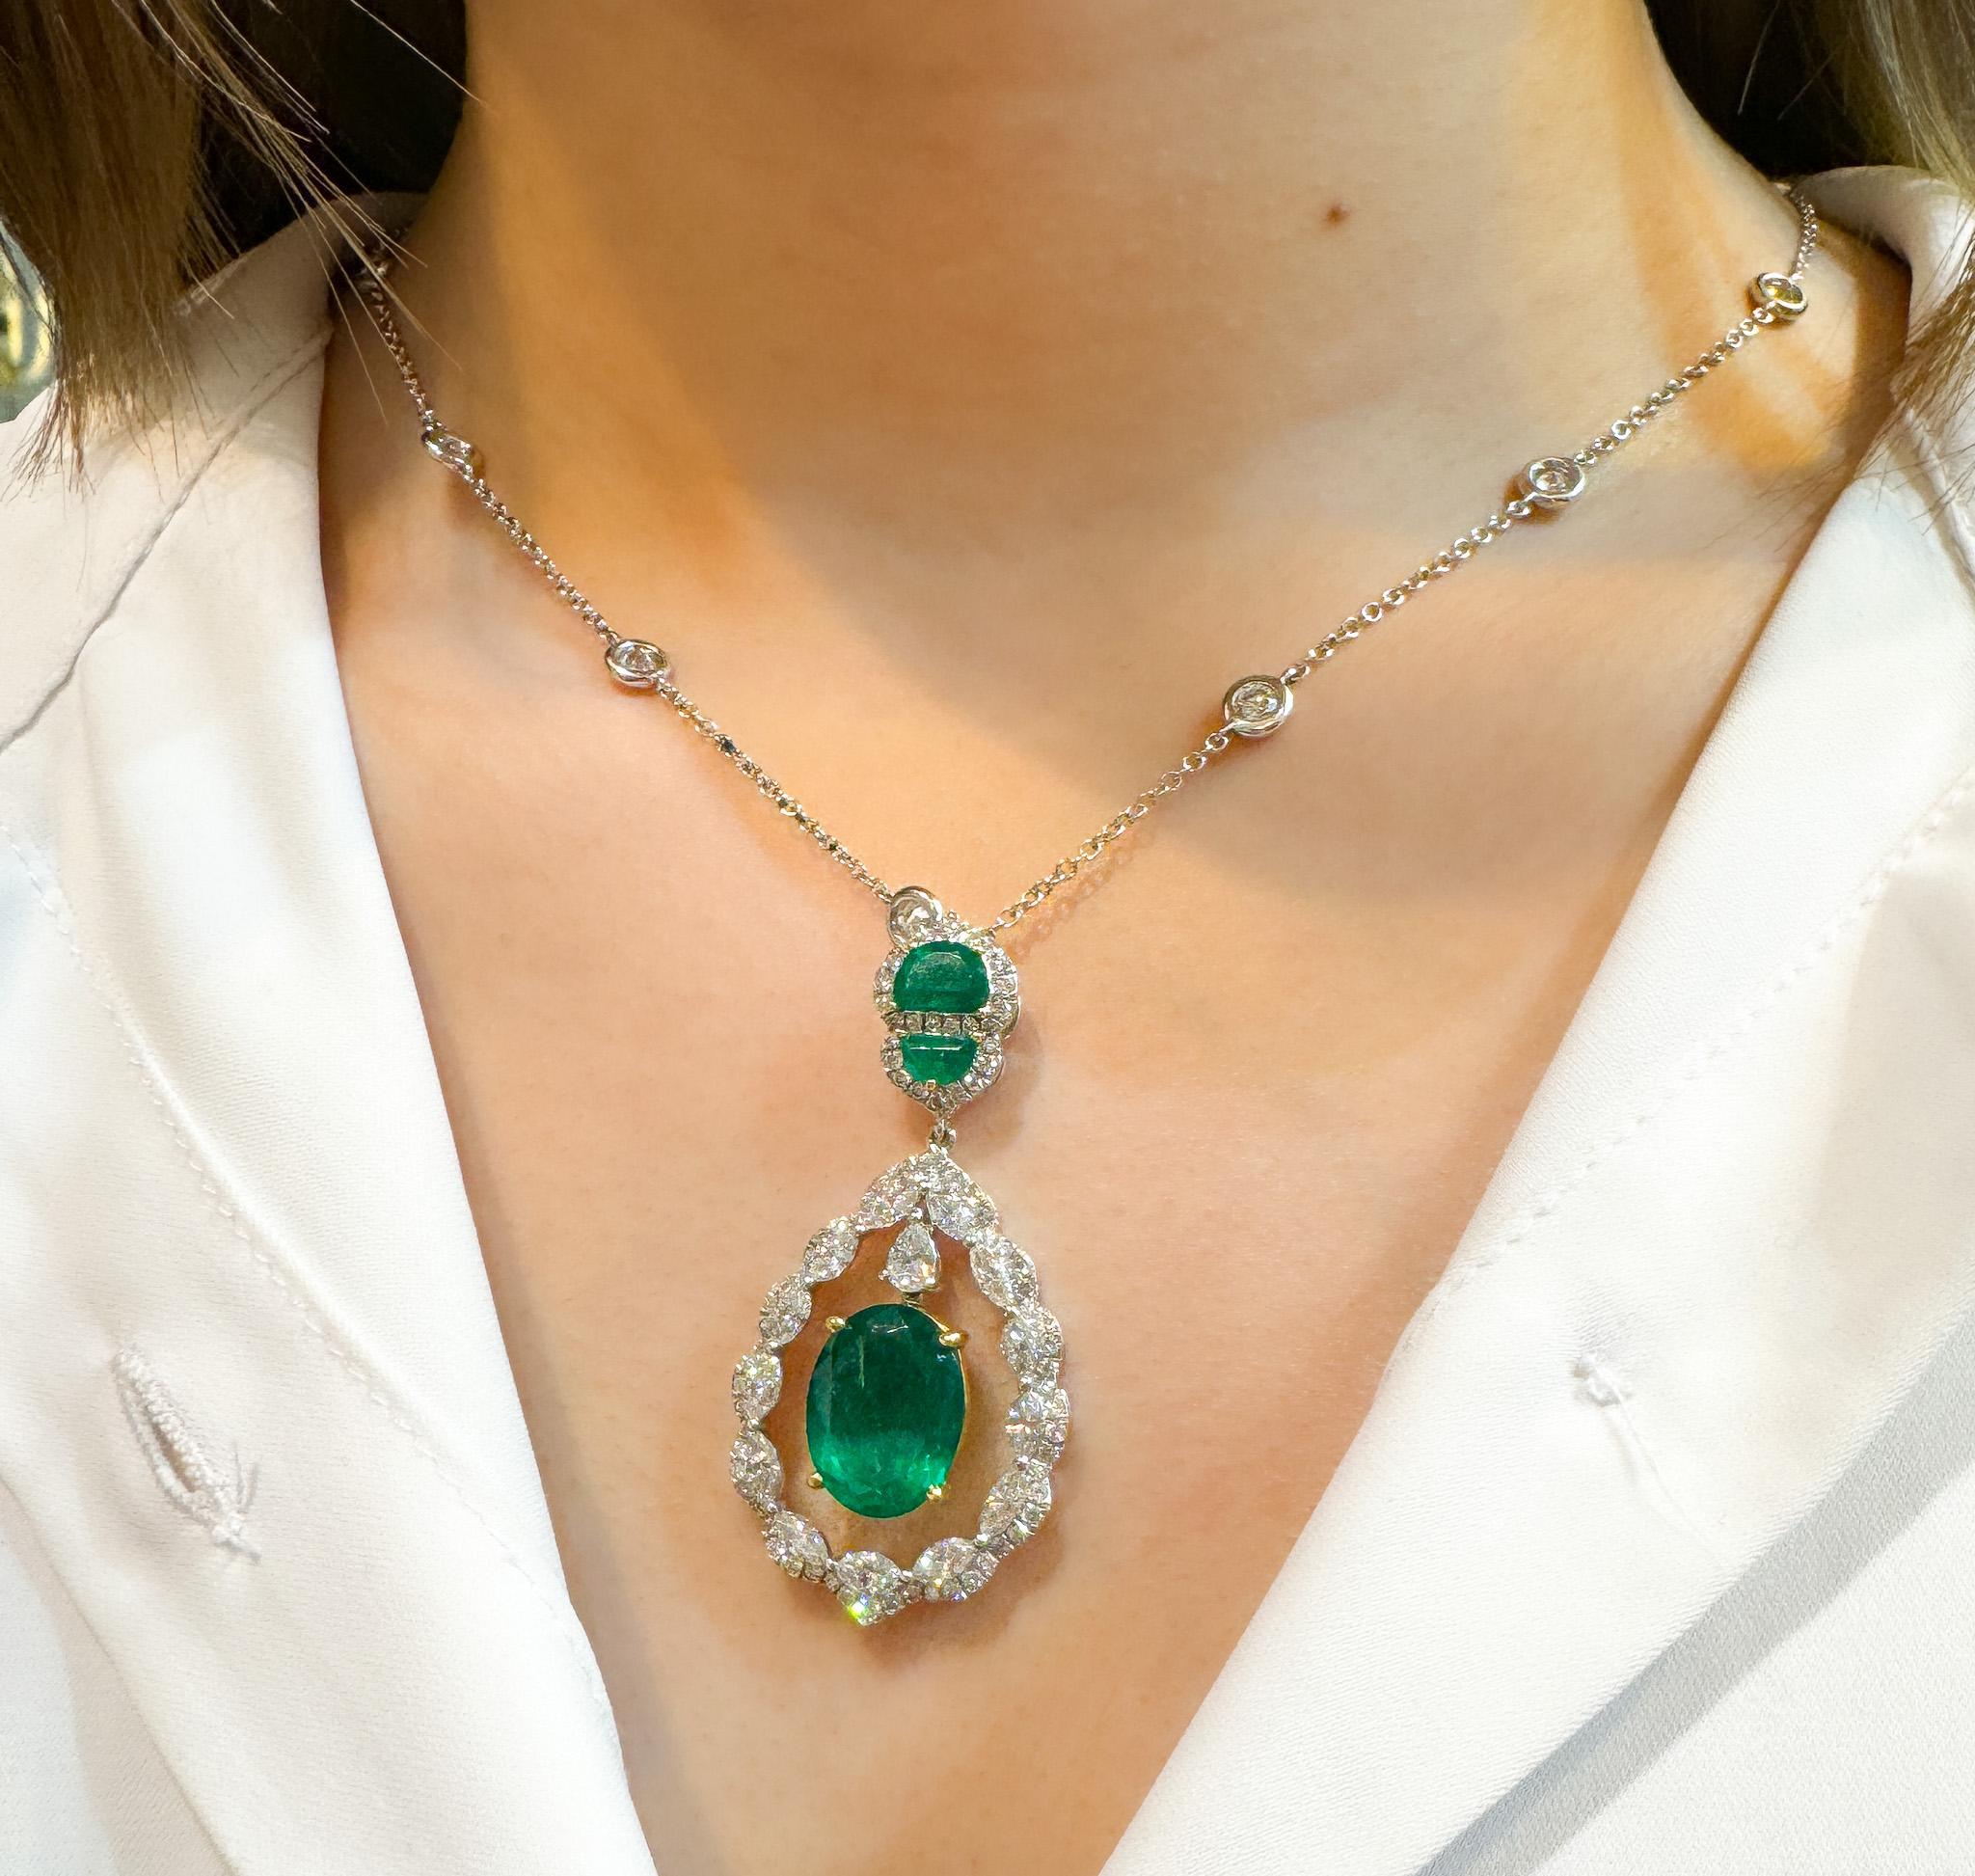 Baroque 6.42 Carat Floating Emerald with Diamond & Emeralds in 18K Pendant Necklace For Sale